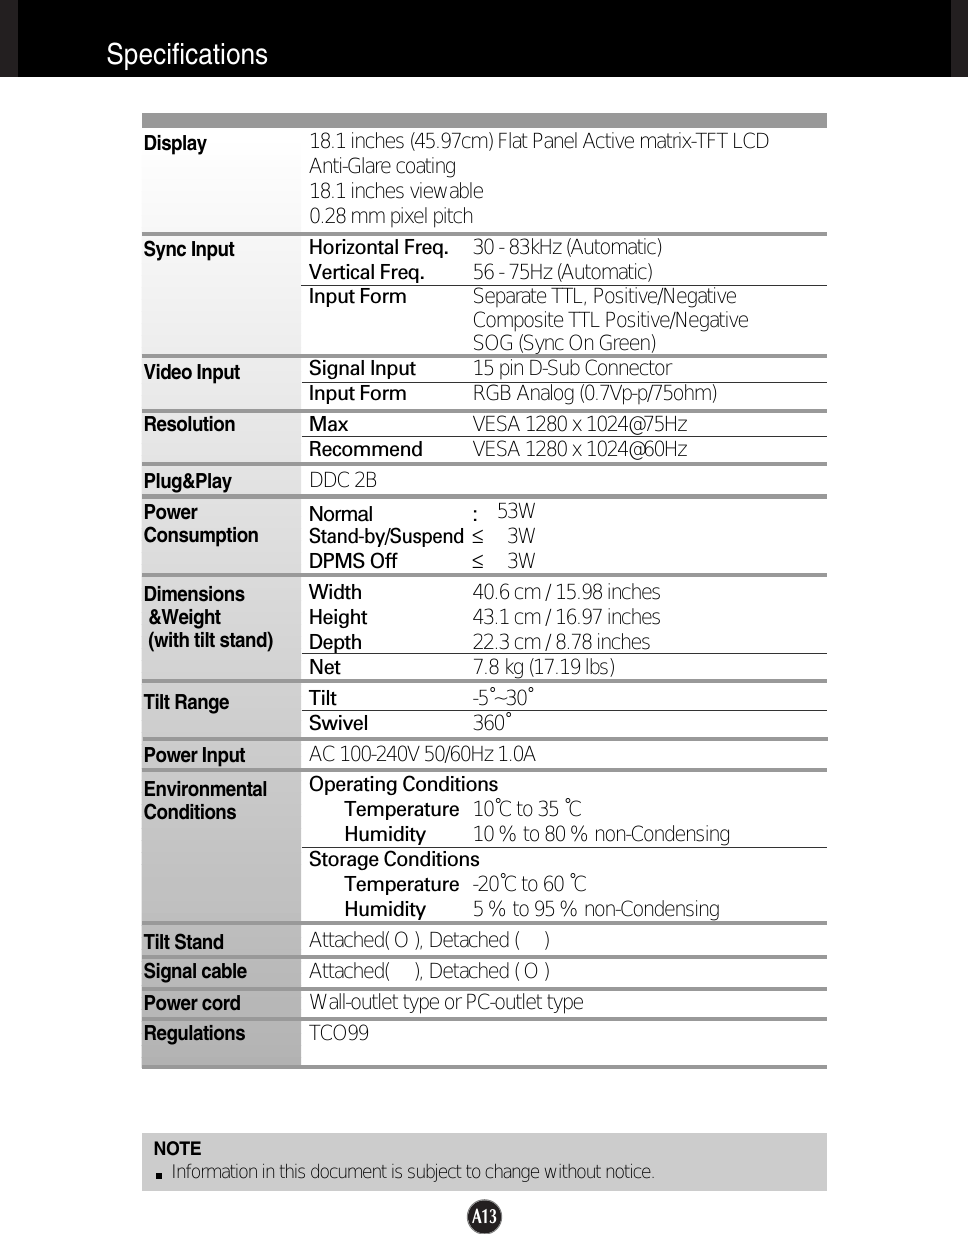 A13SpecificationsNOTEInformation in this document is subject to change without notice.18.1 inches (45.97cm) Flat Panel Active matrix-TFT LCD Anti-Glare coating18.1 inches viewable0.28 mm pixel pitchHorizontal Freq. 30 - 83kHz (Automatic)Vertical Freq. 56 - 75Hz (Automatic)Input Form Separate TTL, Positive/NegativeComposite TTL Positive/NegativeSOG (Sync On Green) Signal Input 15 pin D-Sub ConnectorInput Form RGB Analog (0.7Vp-p/75ohm)Max VESA 1280 x 1024@75Hz Recommend VESA 1280 x 1024@60HzDDC 2BNormal :53WStand-by/Suspend≤3WDPMS Off ≤3WWidth 40.6 cm / 15.98 inchesHeight 43.1 cm / 16.97 inchesDepth 22.3 cm / 8.78 inchesNet 7.8 kg (17.19 lbs)Tilt -5˚~30˚Swivel 360˚AC 100-240V 50/60Hz 1.0AOperating ConditionsTemperature 10˚C to 35 ˚CHumidity 10 % to 80 % non-CondensingStorage ConditionsTemperature -20˚C to 60 ˚CHumidity 5 % to 95 % non-CondensingAttached( O ), Detached (     )Attached(     ), Detached ( O )Wall-outlet type or PC-outlet typeTCO99DisplaySync InputVideo InputResolutionPlug&amp;PlayPowerConsumptionDimensions&amp;Weight(with tilt stand)Tilt RangePower InputEnvironmentalConditionsTilt StandSignal cablePower cord Regulations